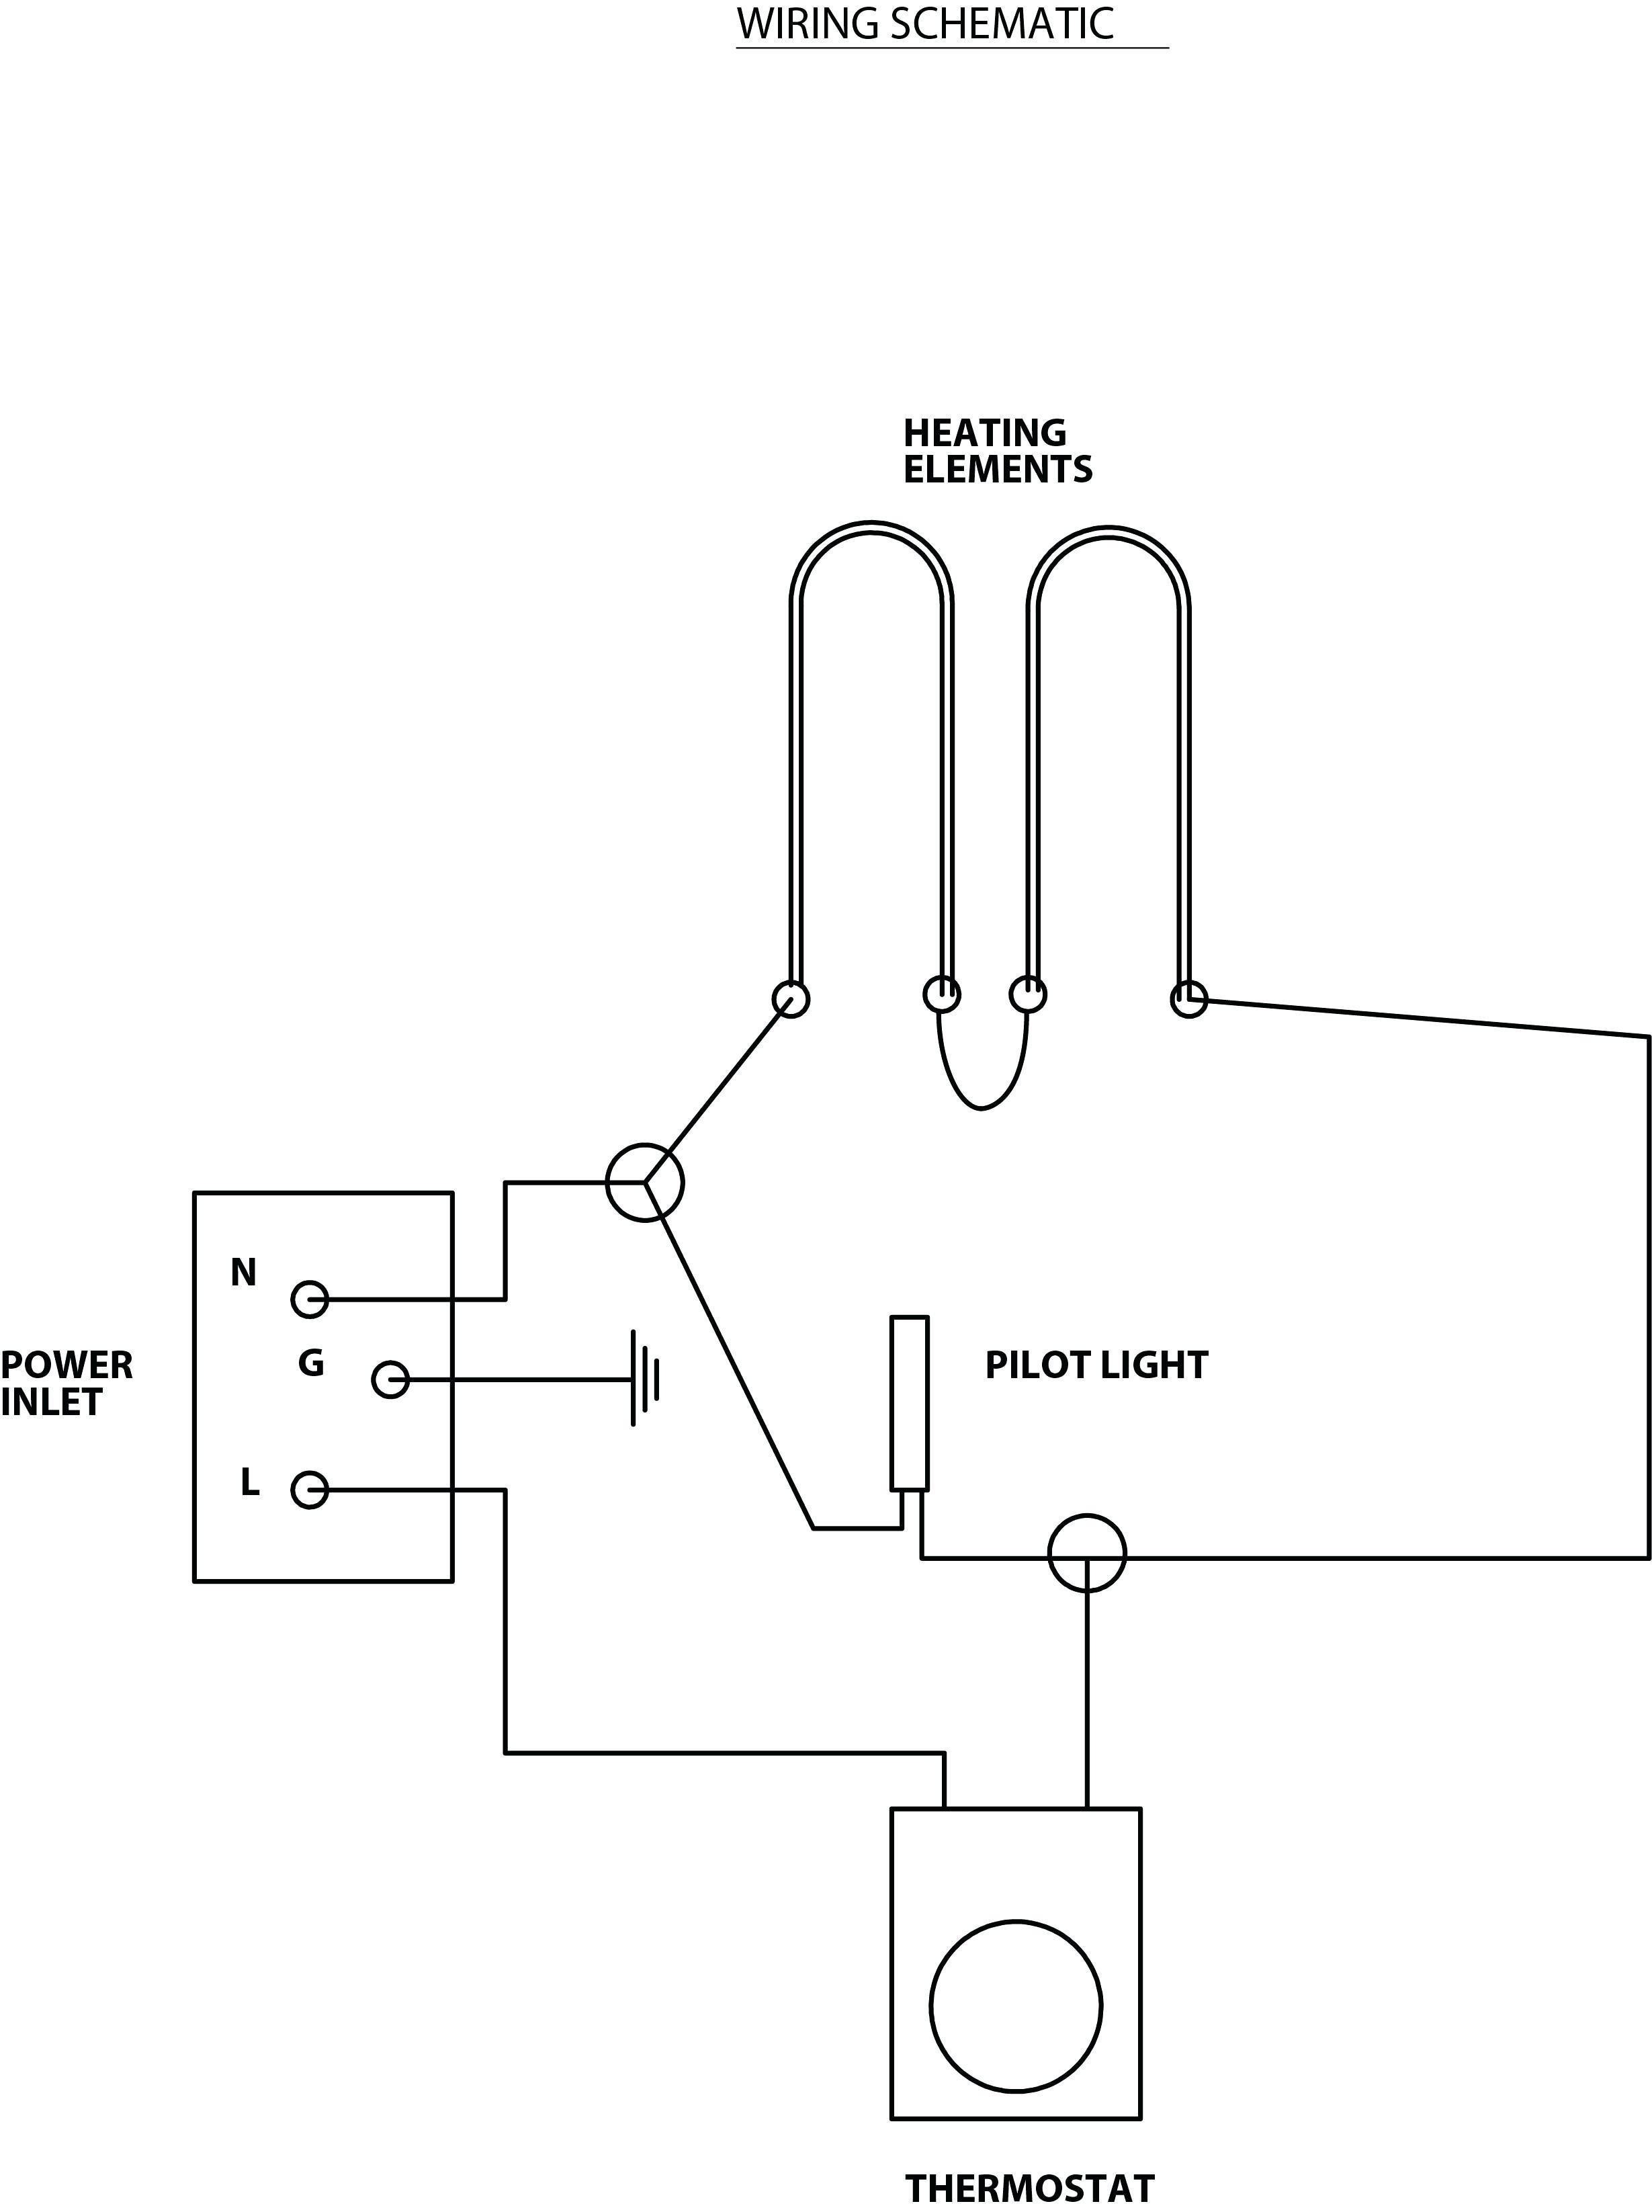 Baseboard Heater Wiring Diagram For 220v Data Simple